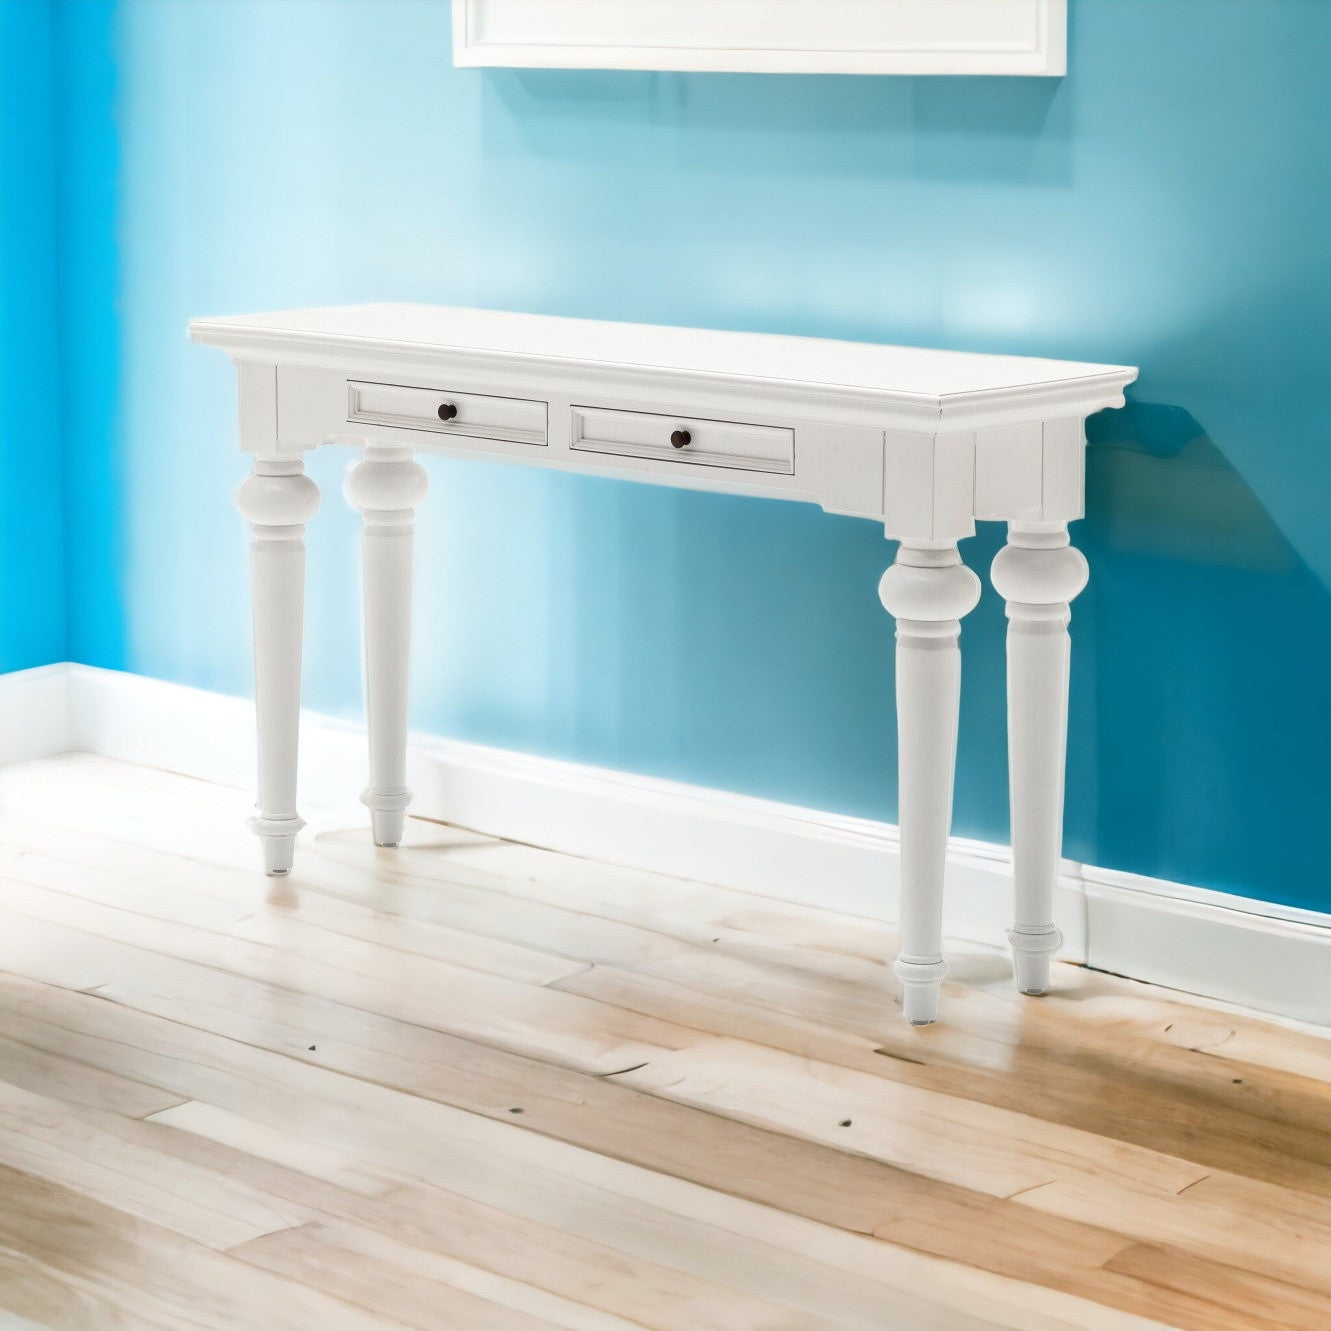 55" White Console Table With Storage